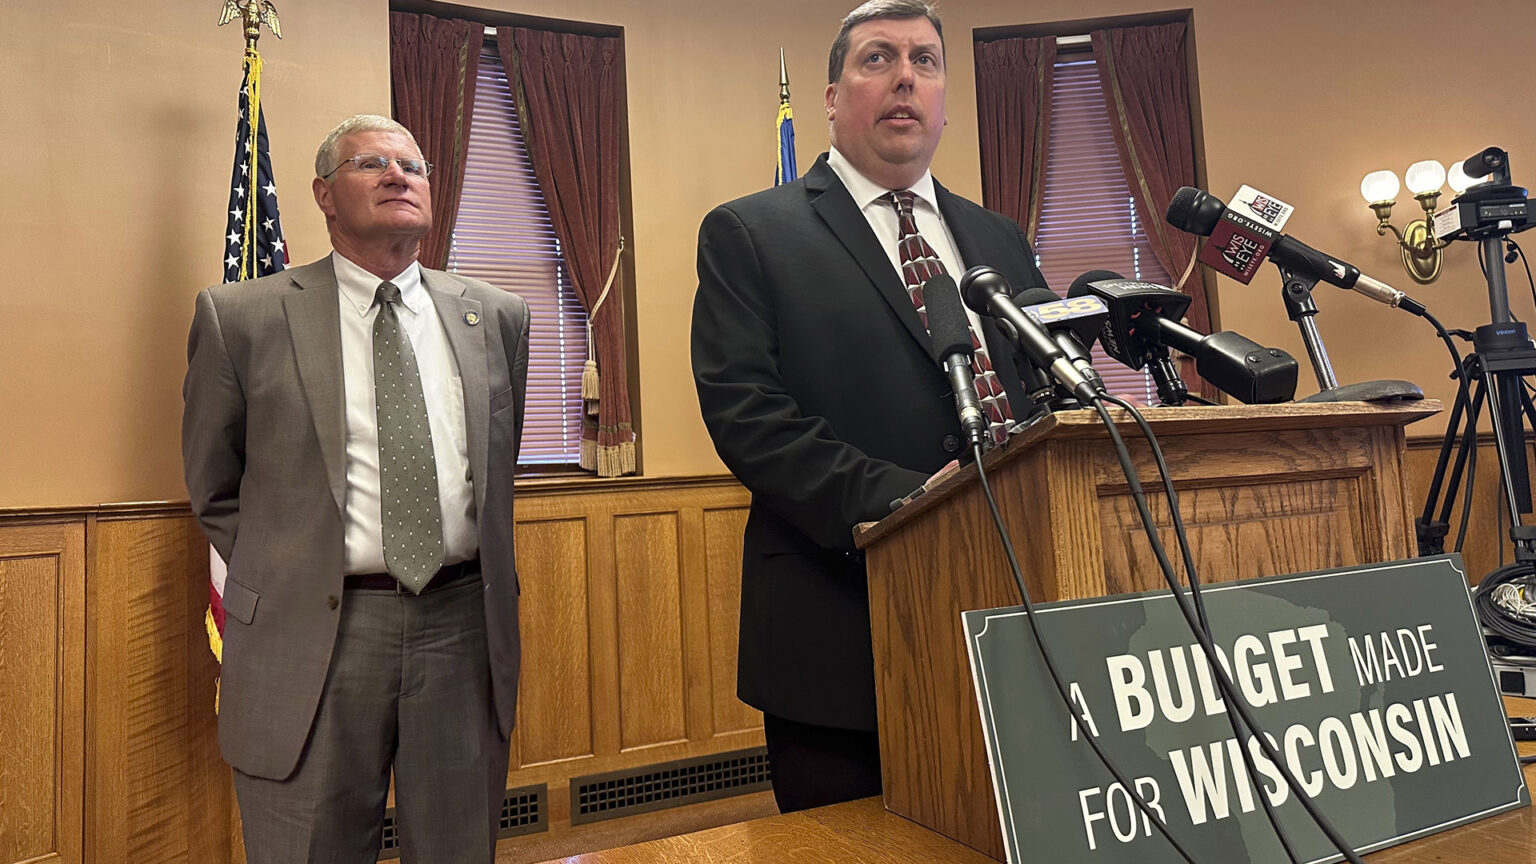 Mark Born speaks into multiple microphones while standing at a table-top podium with a sign at its base reading A Budget Made for Wisconsin, with Howard Marklein standing behind him in a room with the U.S. and Wisconsin flags, a wall sconce lighting fixture, and windows with curtains tied open and closed blinds.